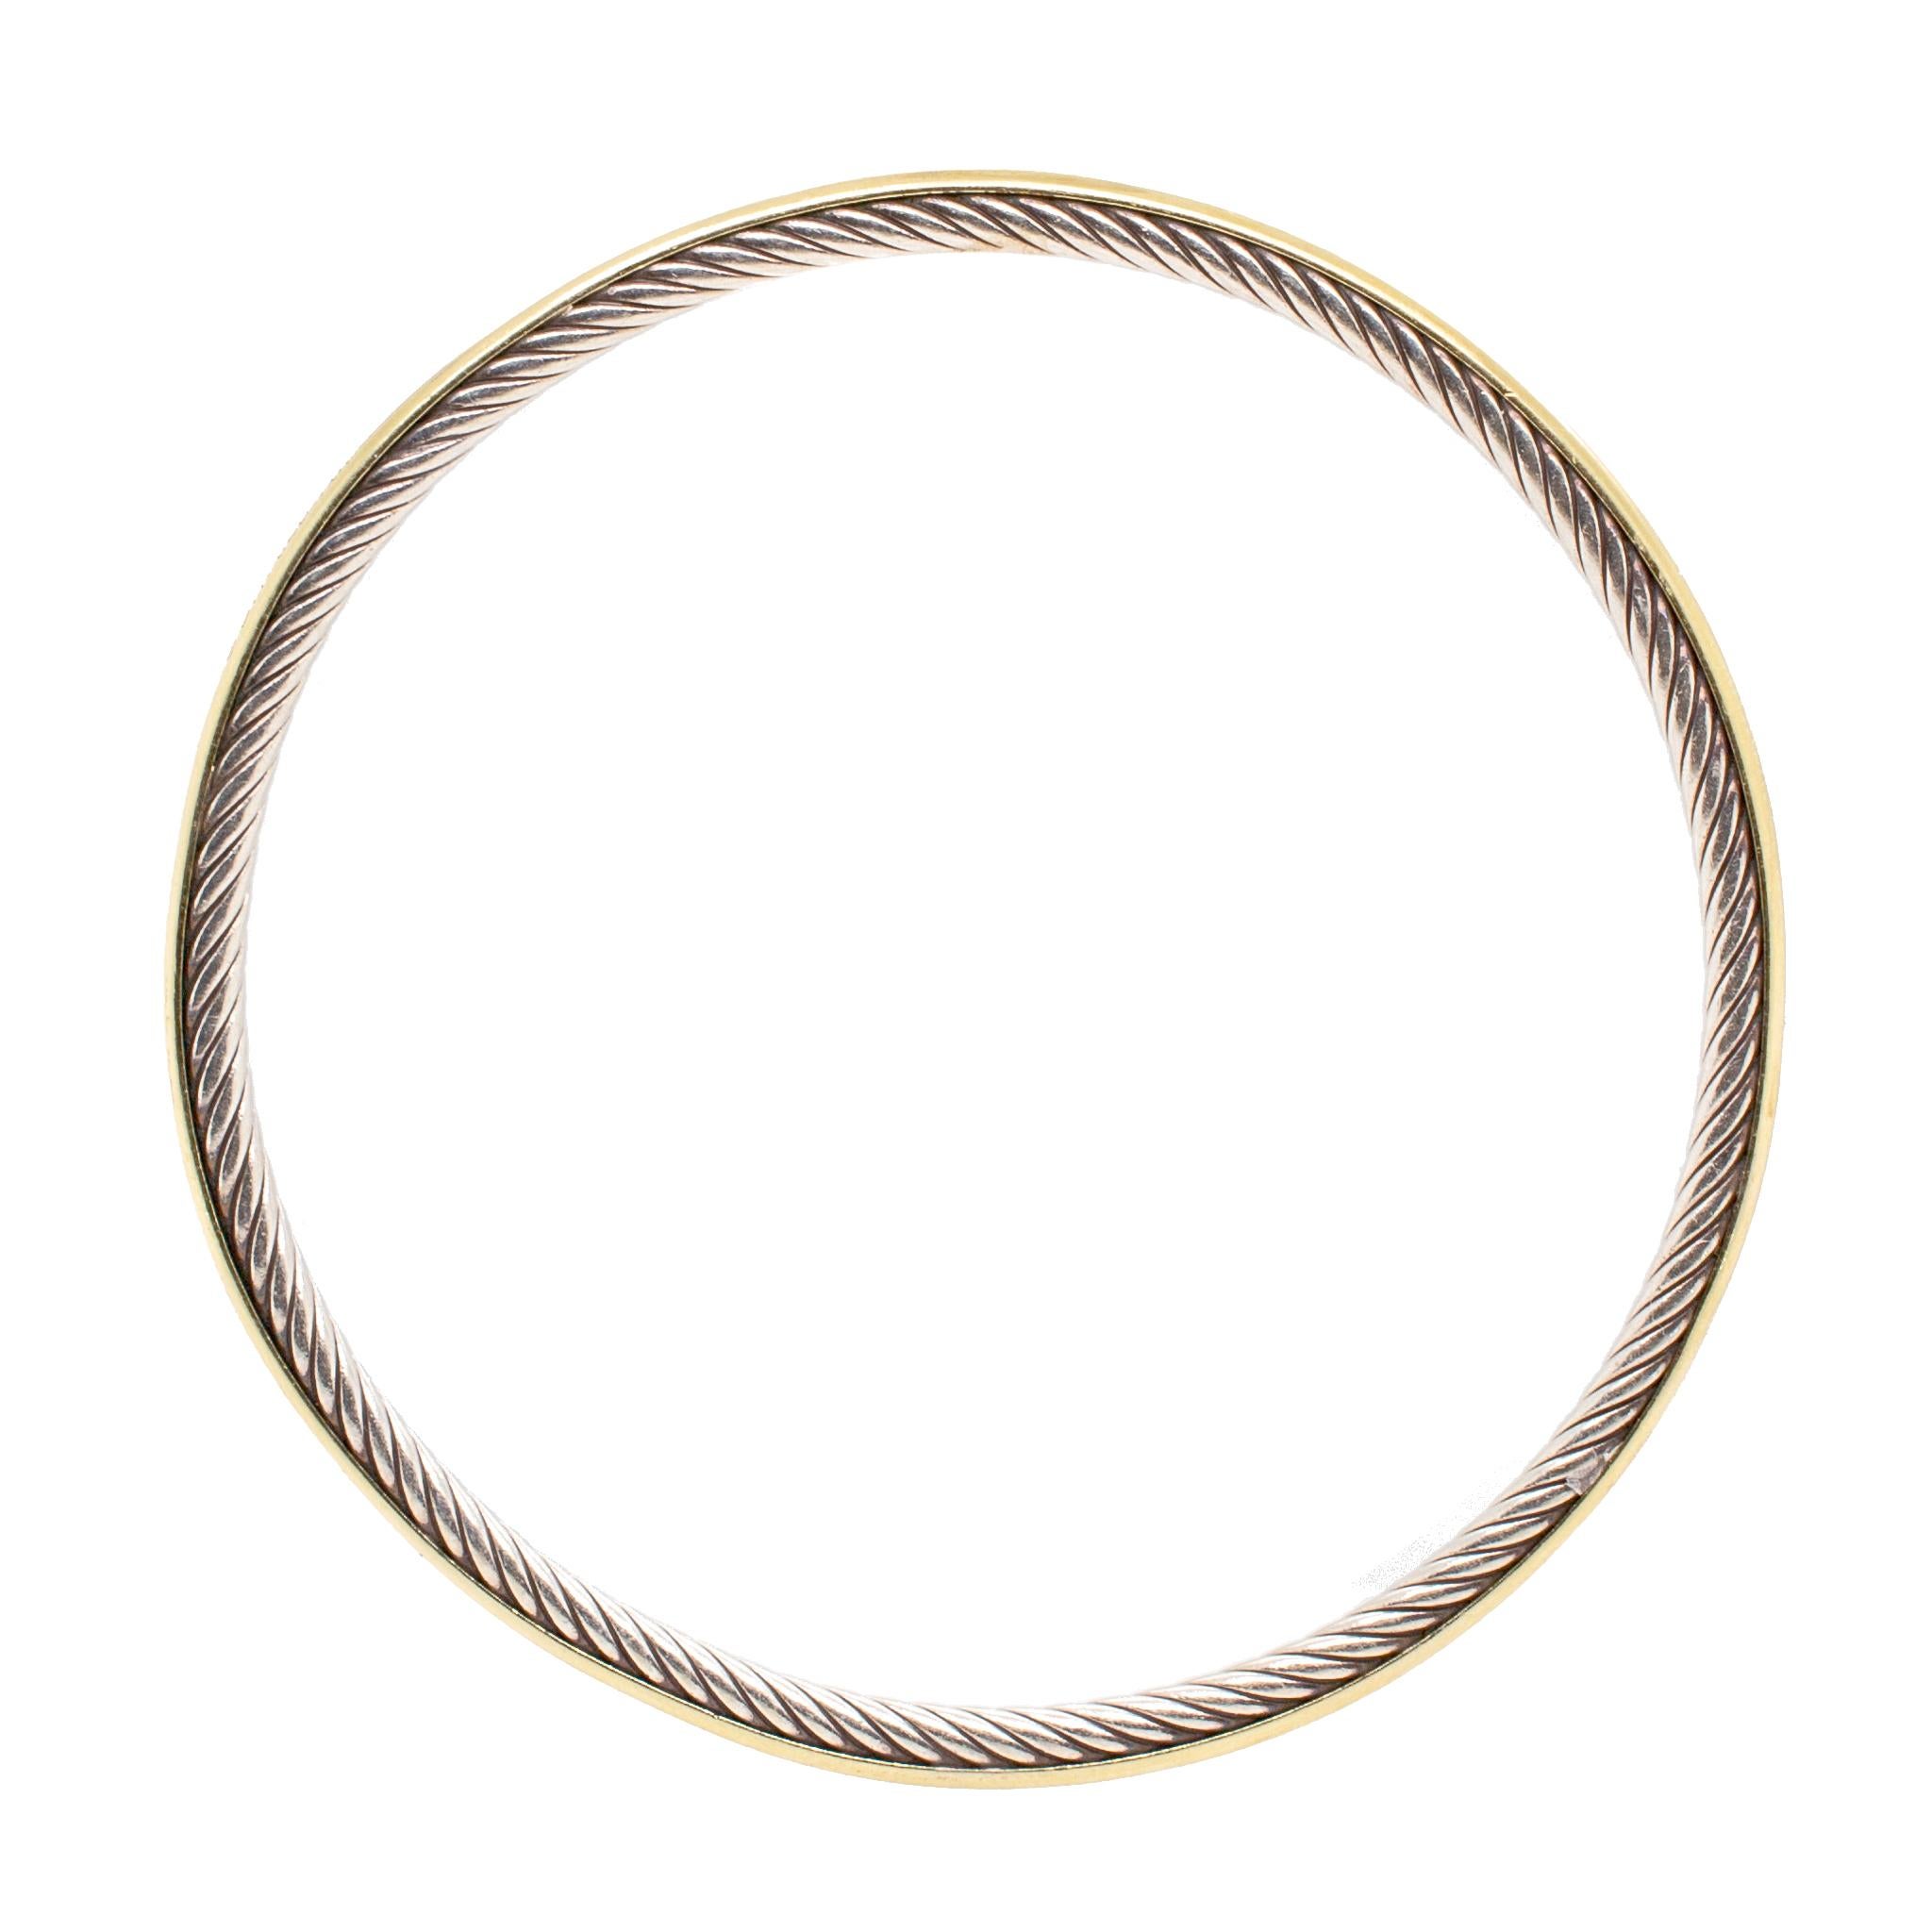 One lady's designer made textured & polished, 18K yellow gold and silver, bangle bracelet. The bracelet is 3.75mm thick and measures approximately 7.50 inches in length by 2.82mm in width and weighs a total of 13.50 grams. Engraved with 